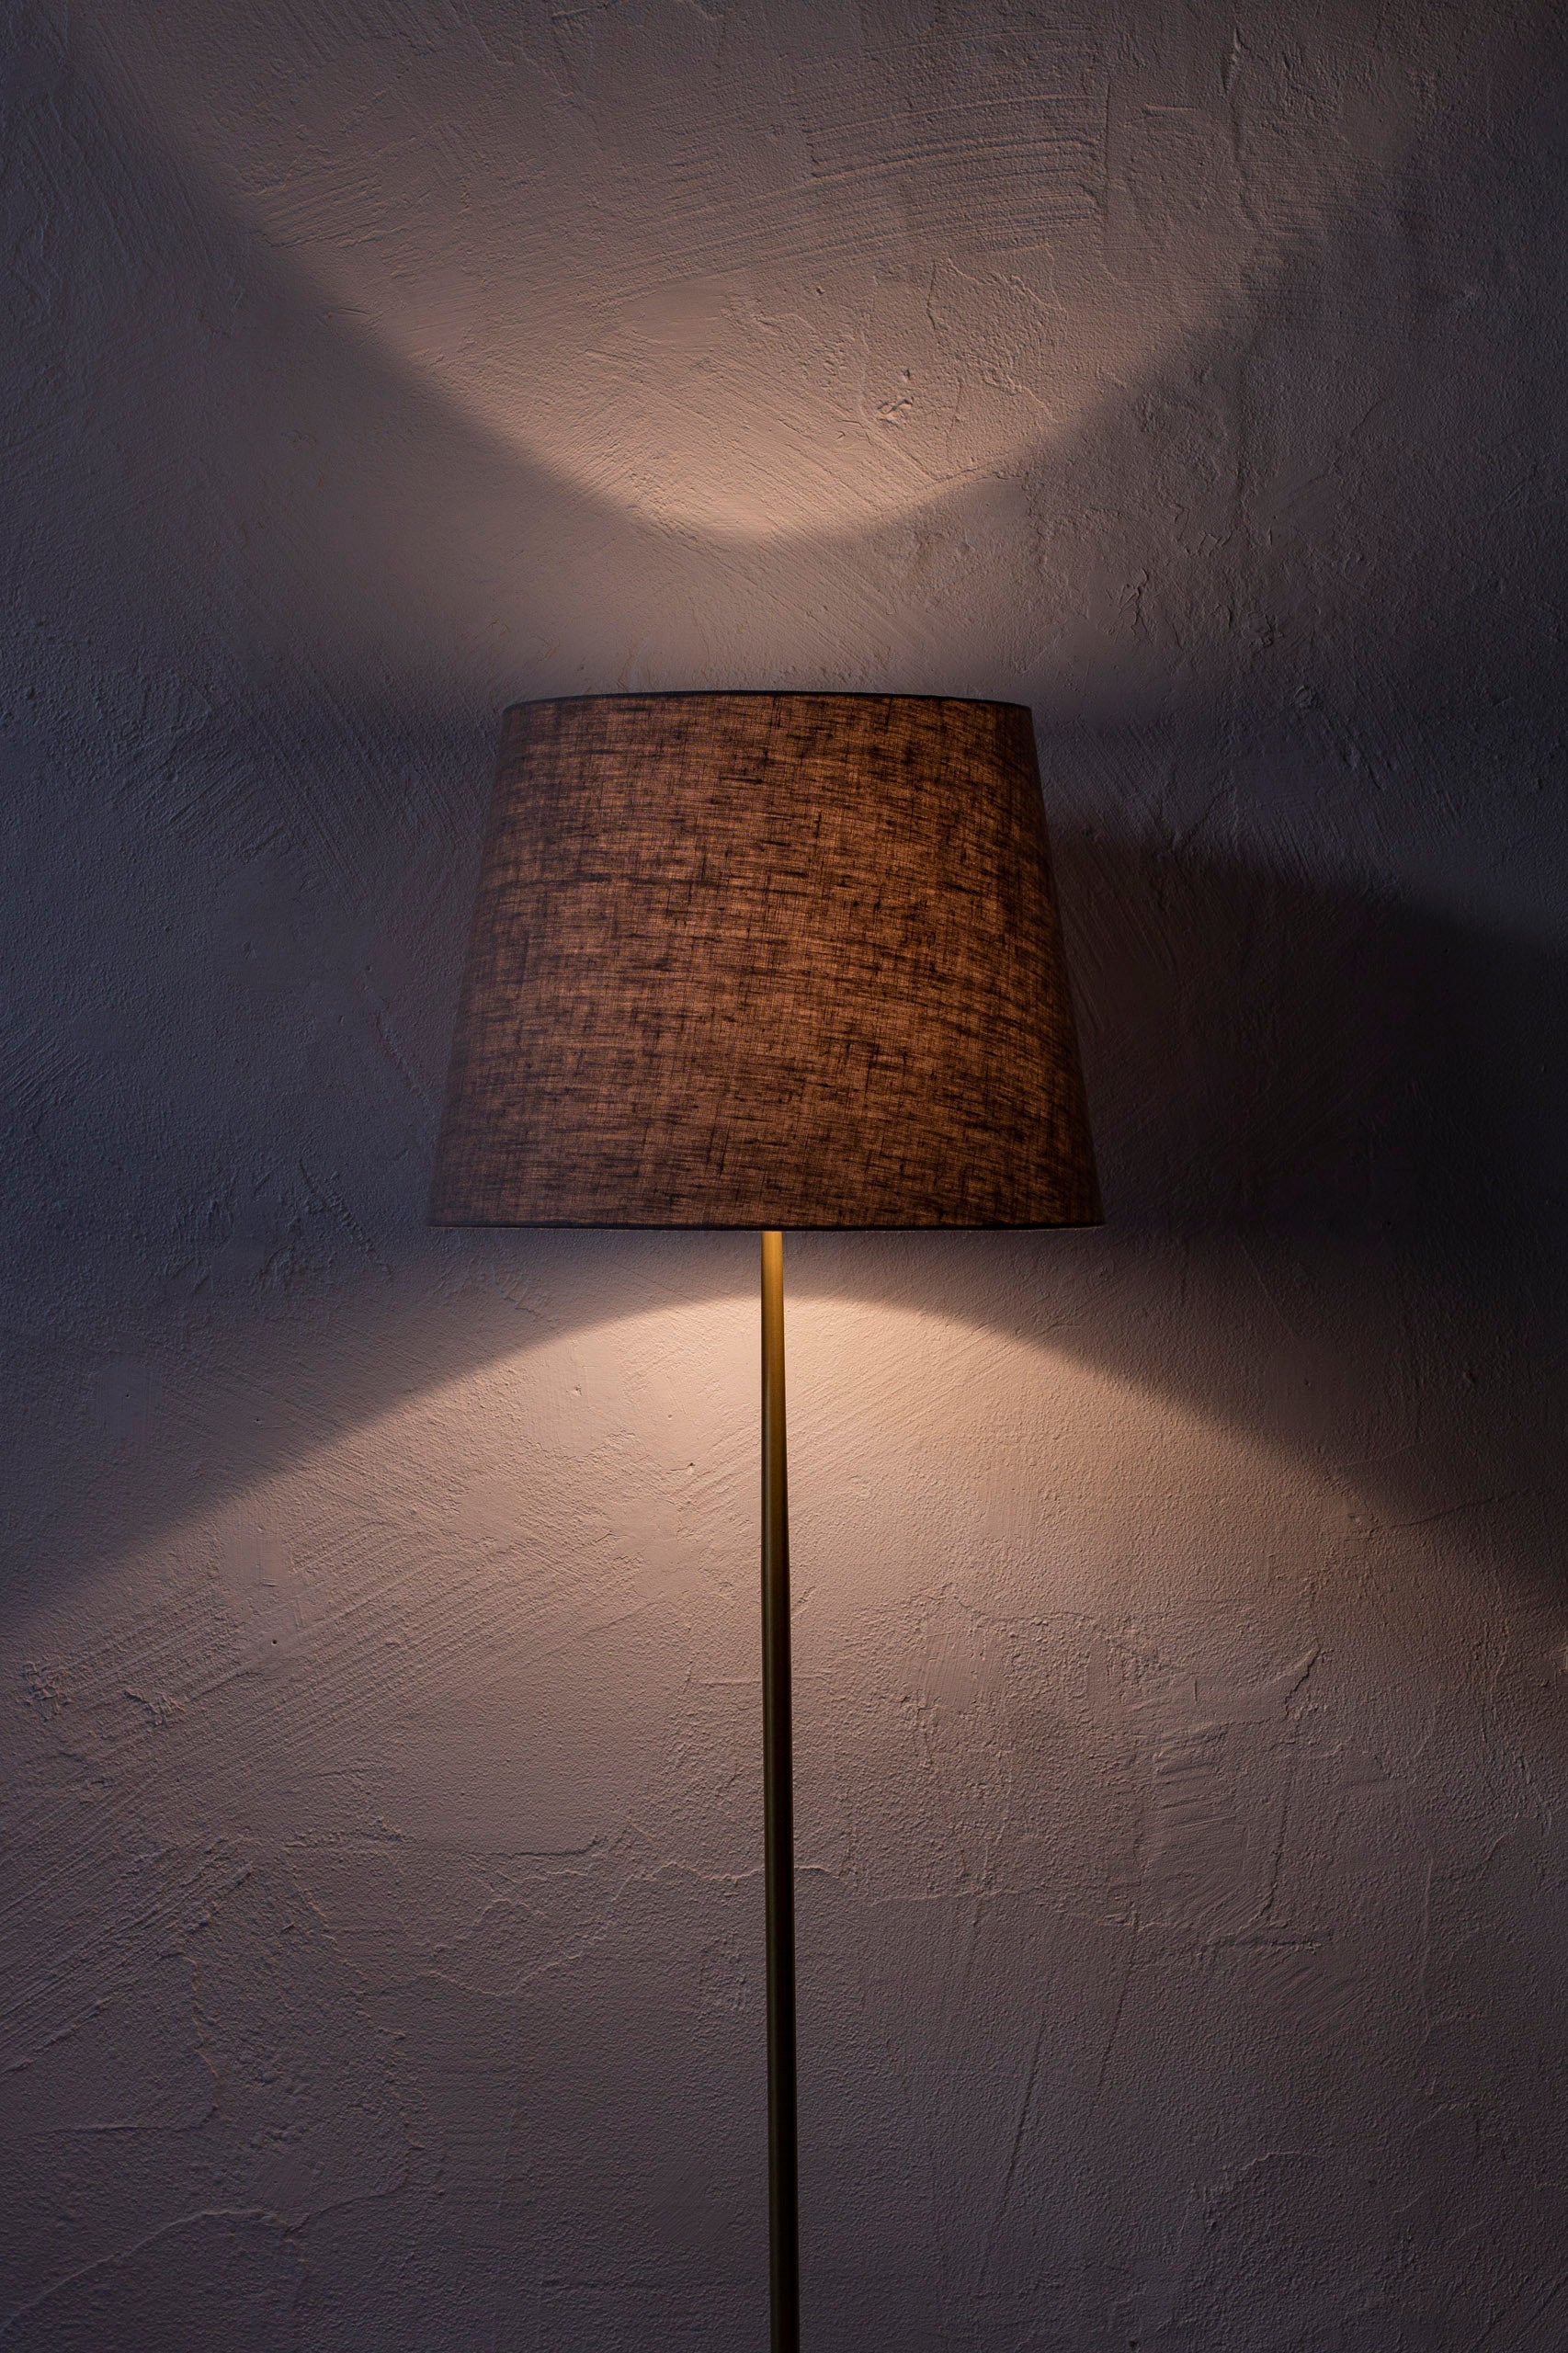 Swedish floor lamp from the 1950s